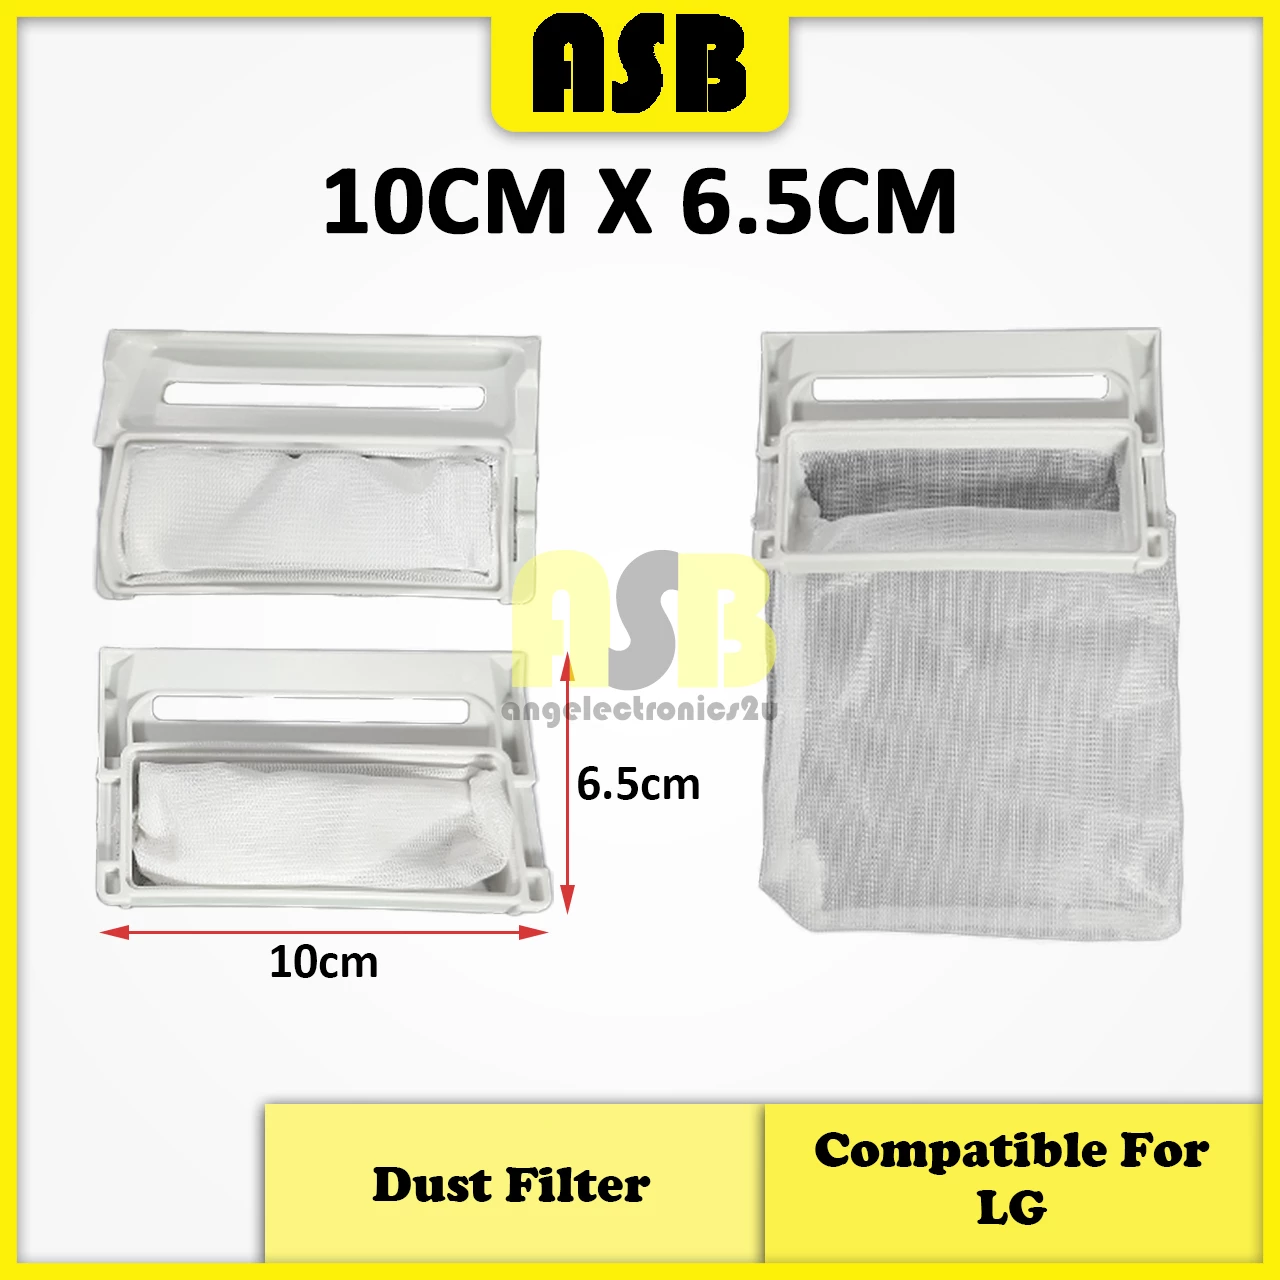 (1pc) ( Compatible : LG ) Washing Machine Dust Filter